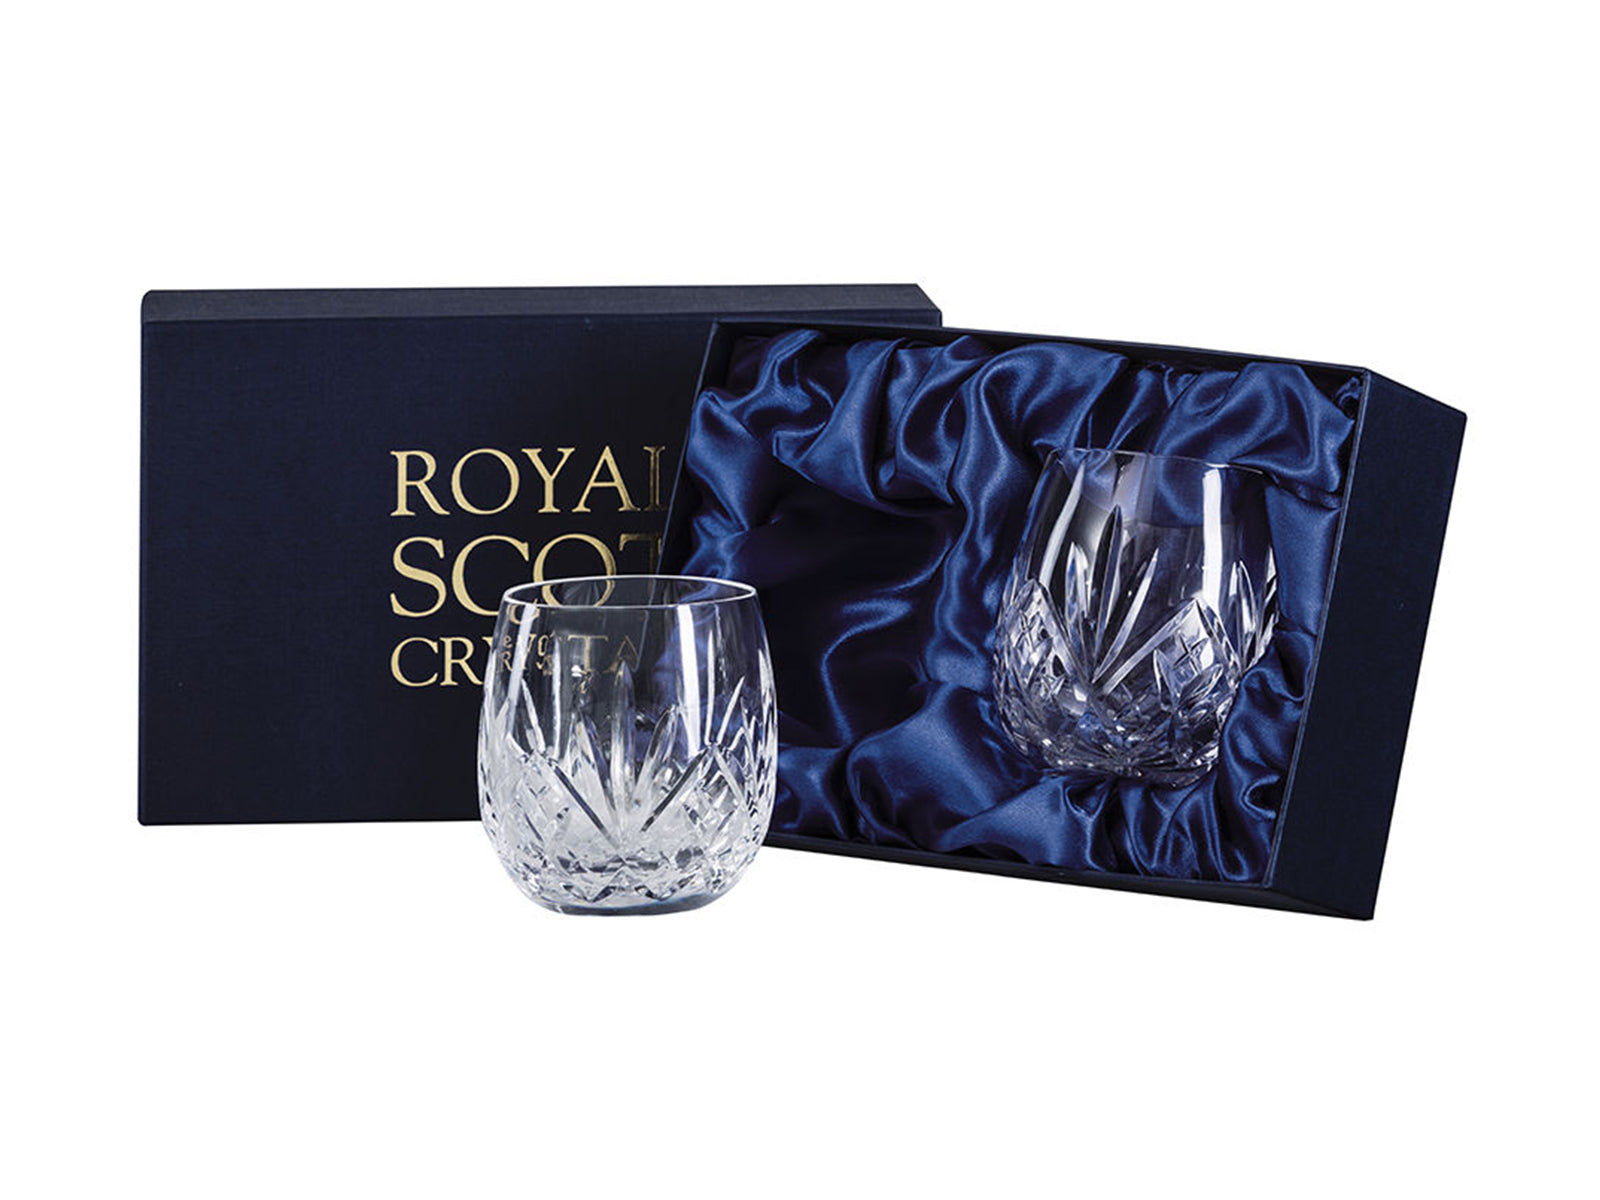 A pair of rounded gin tumblers with a five-pointed fan design over diamonds cut around the base with a smooth rim. They come in a navy-blue silk-lined presentation box with gold branding on the lid.